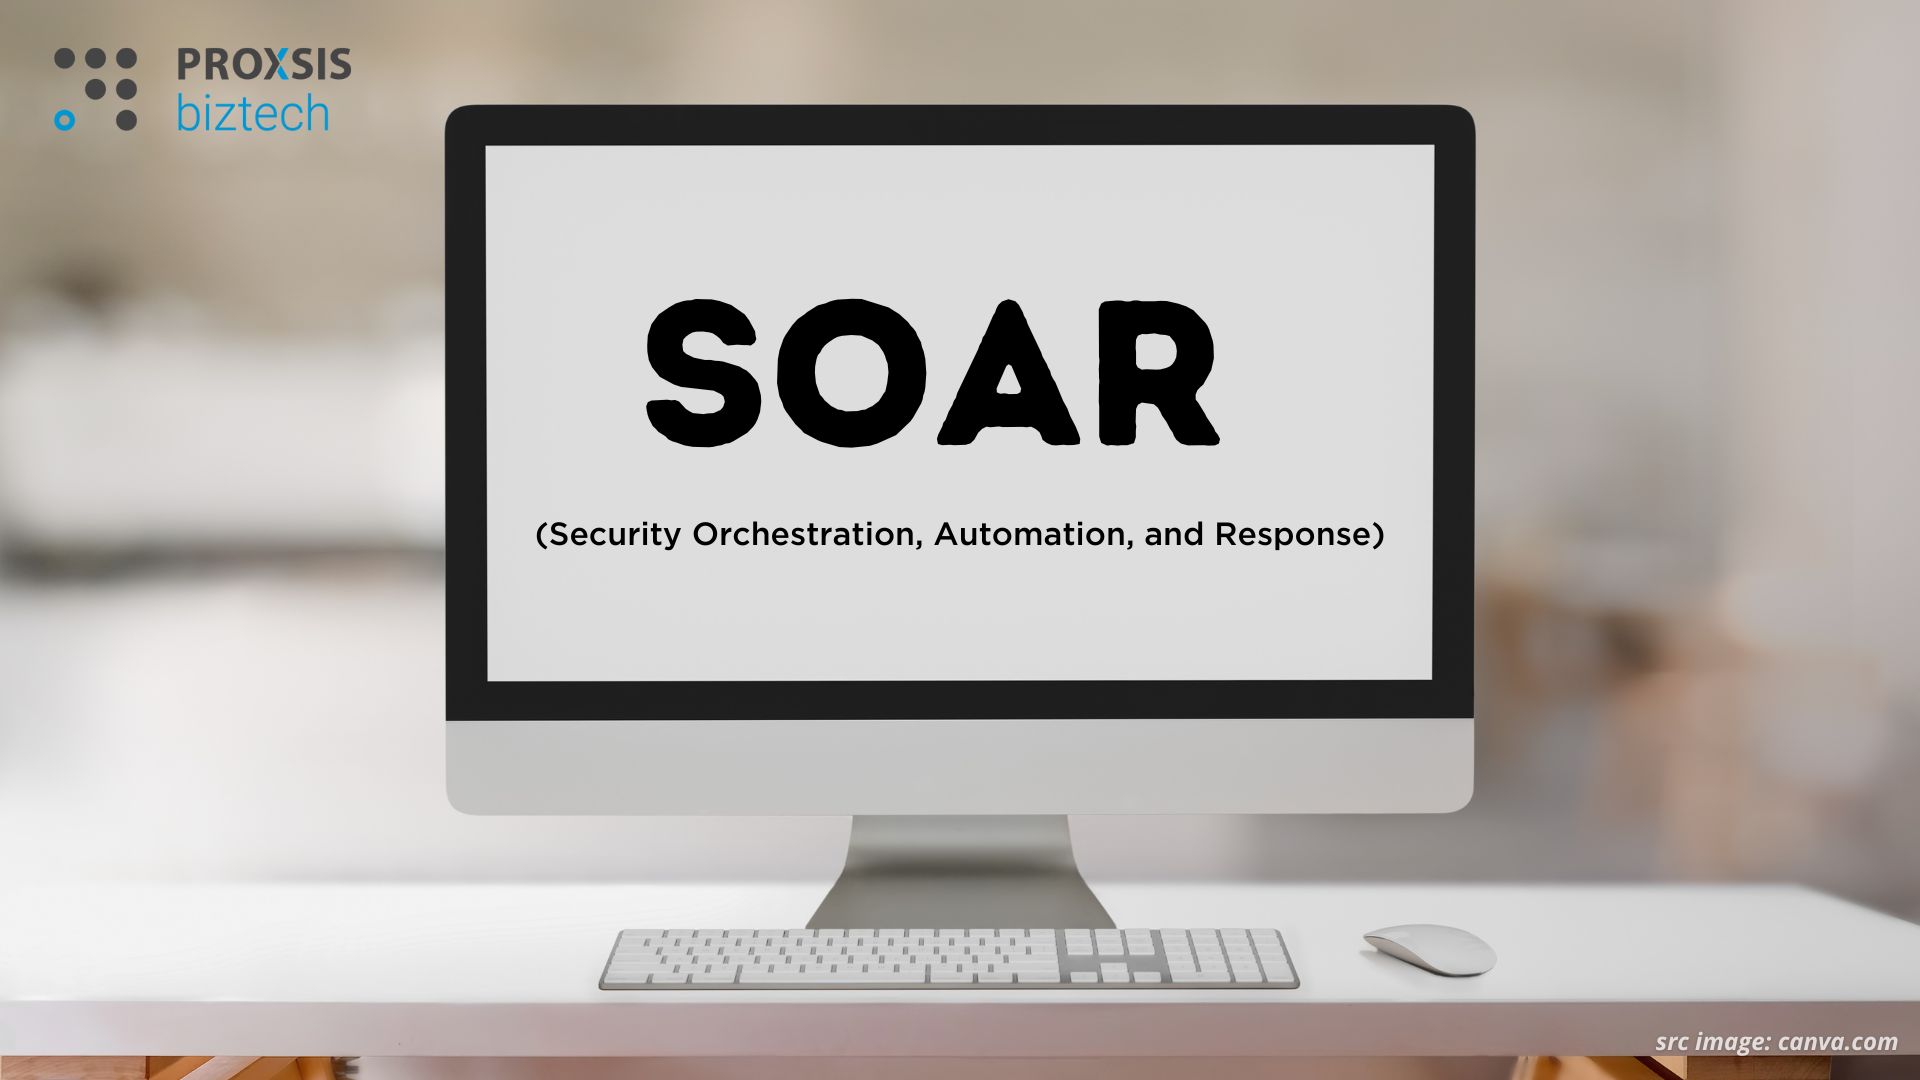 15 Fitur Canggih SOAR (Security Orchestration Automation and Response)